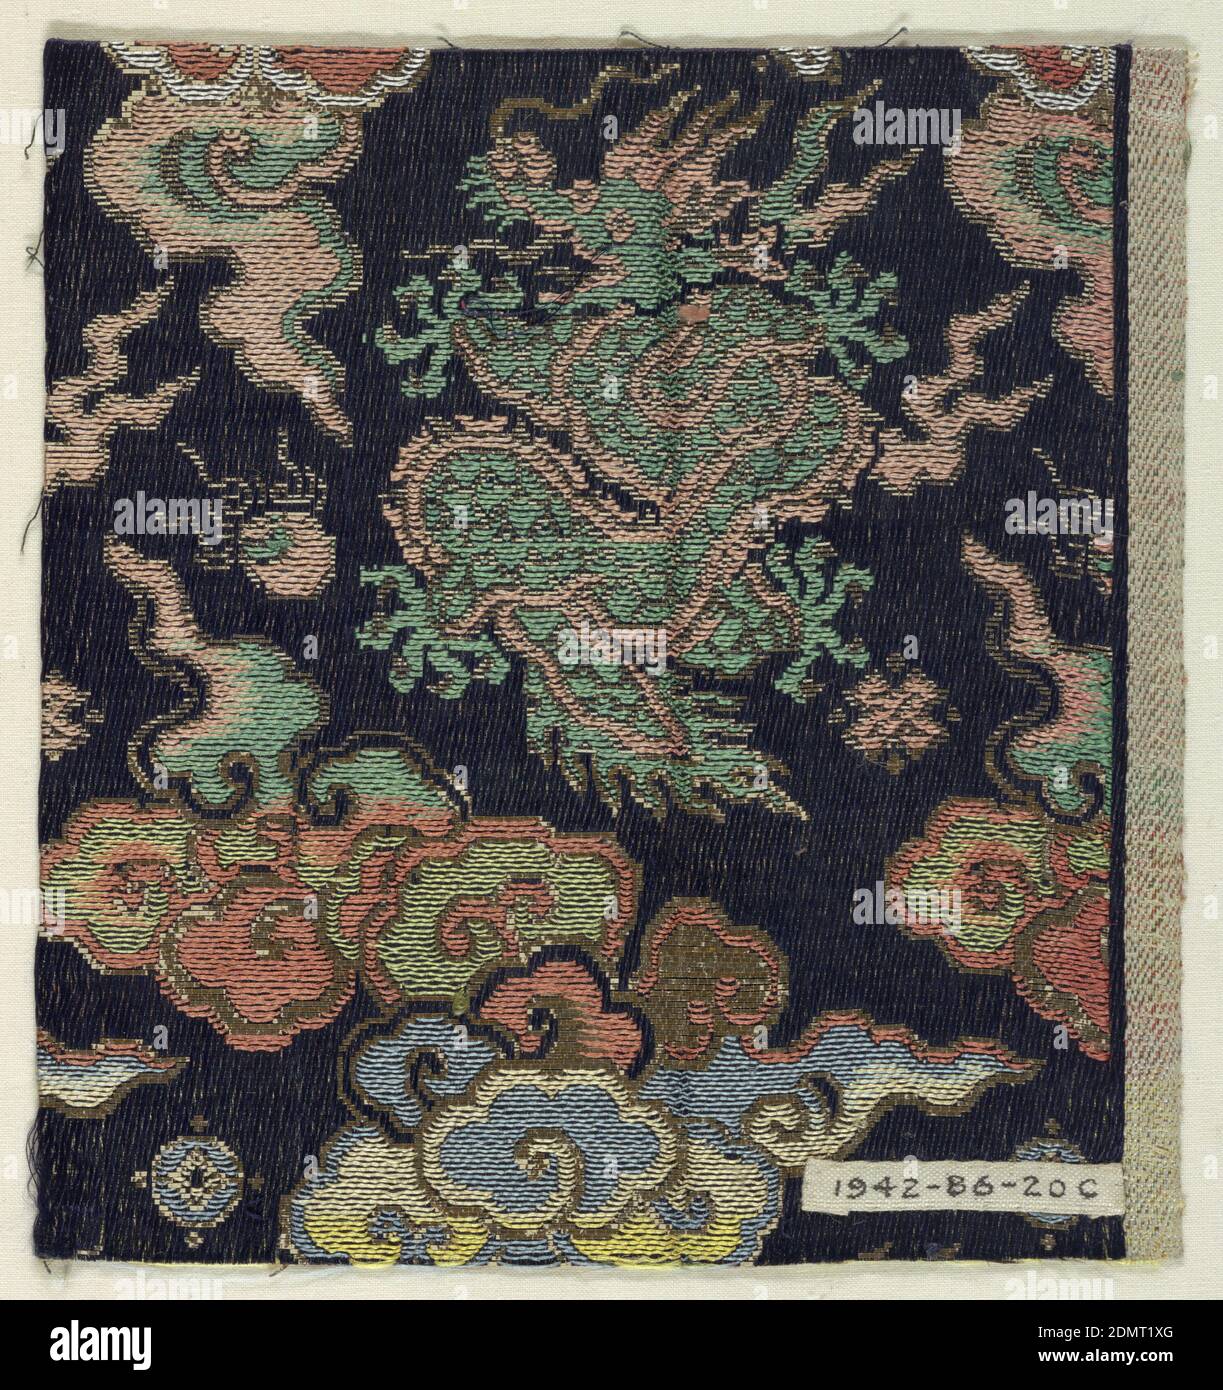 Fragment, Medium: silk, paper with applied gold foil Technique: plain compound twill, Navy blue twill ground with woven supplementary weft pattern of large scale dragons and flying clouds in rust, white, yellow, green, and sky blue silk threads with metallic paper threads., Japan, 19th century, woven textiles, Fragment Stock Photo